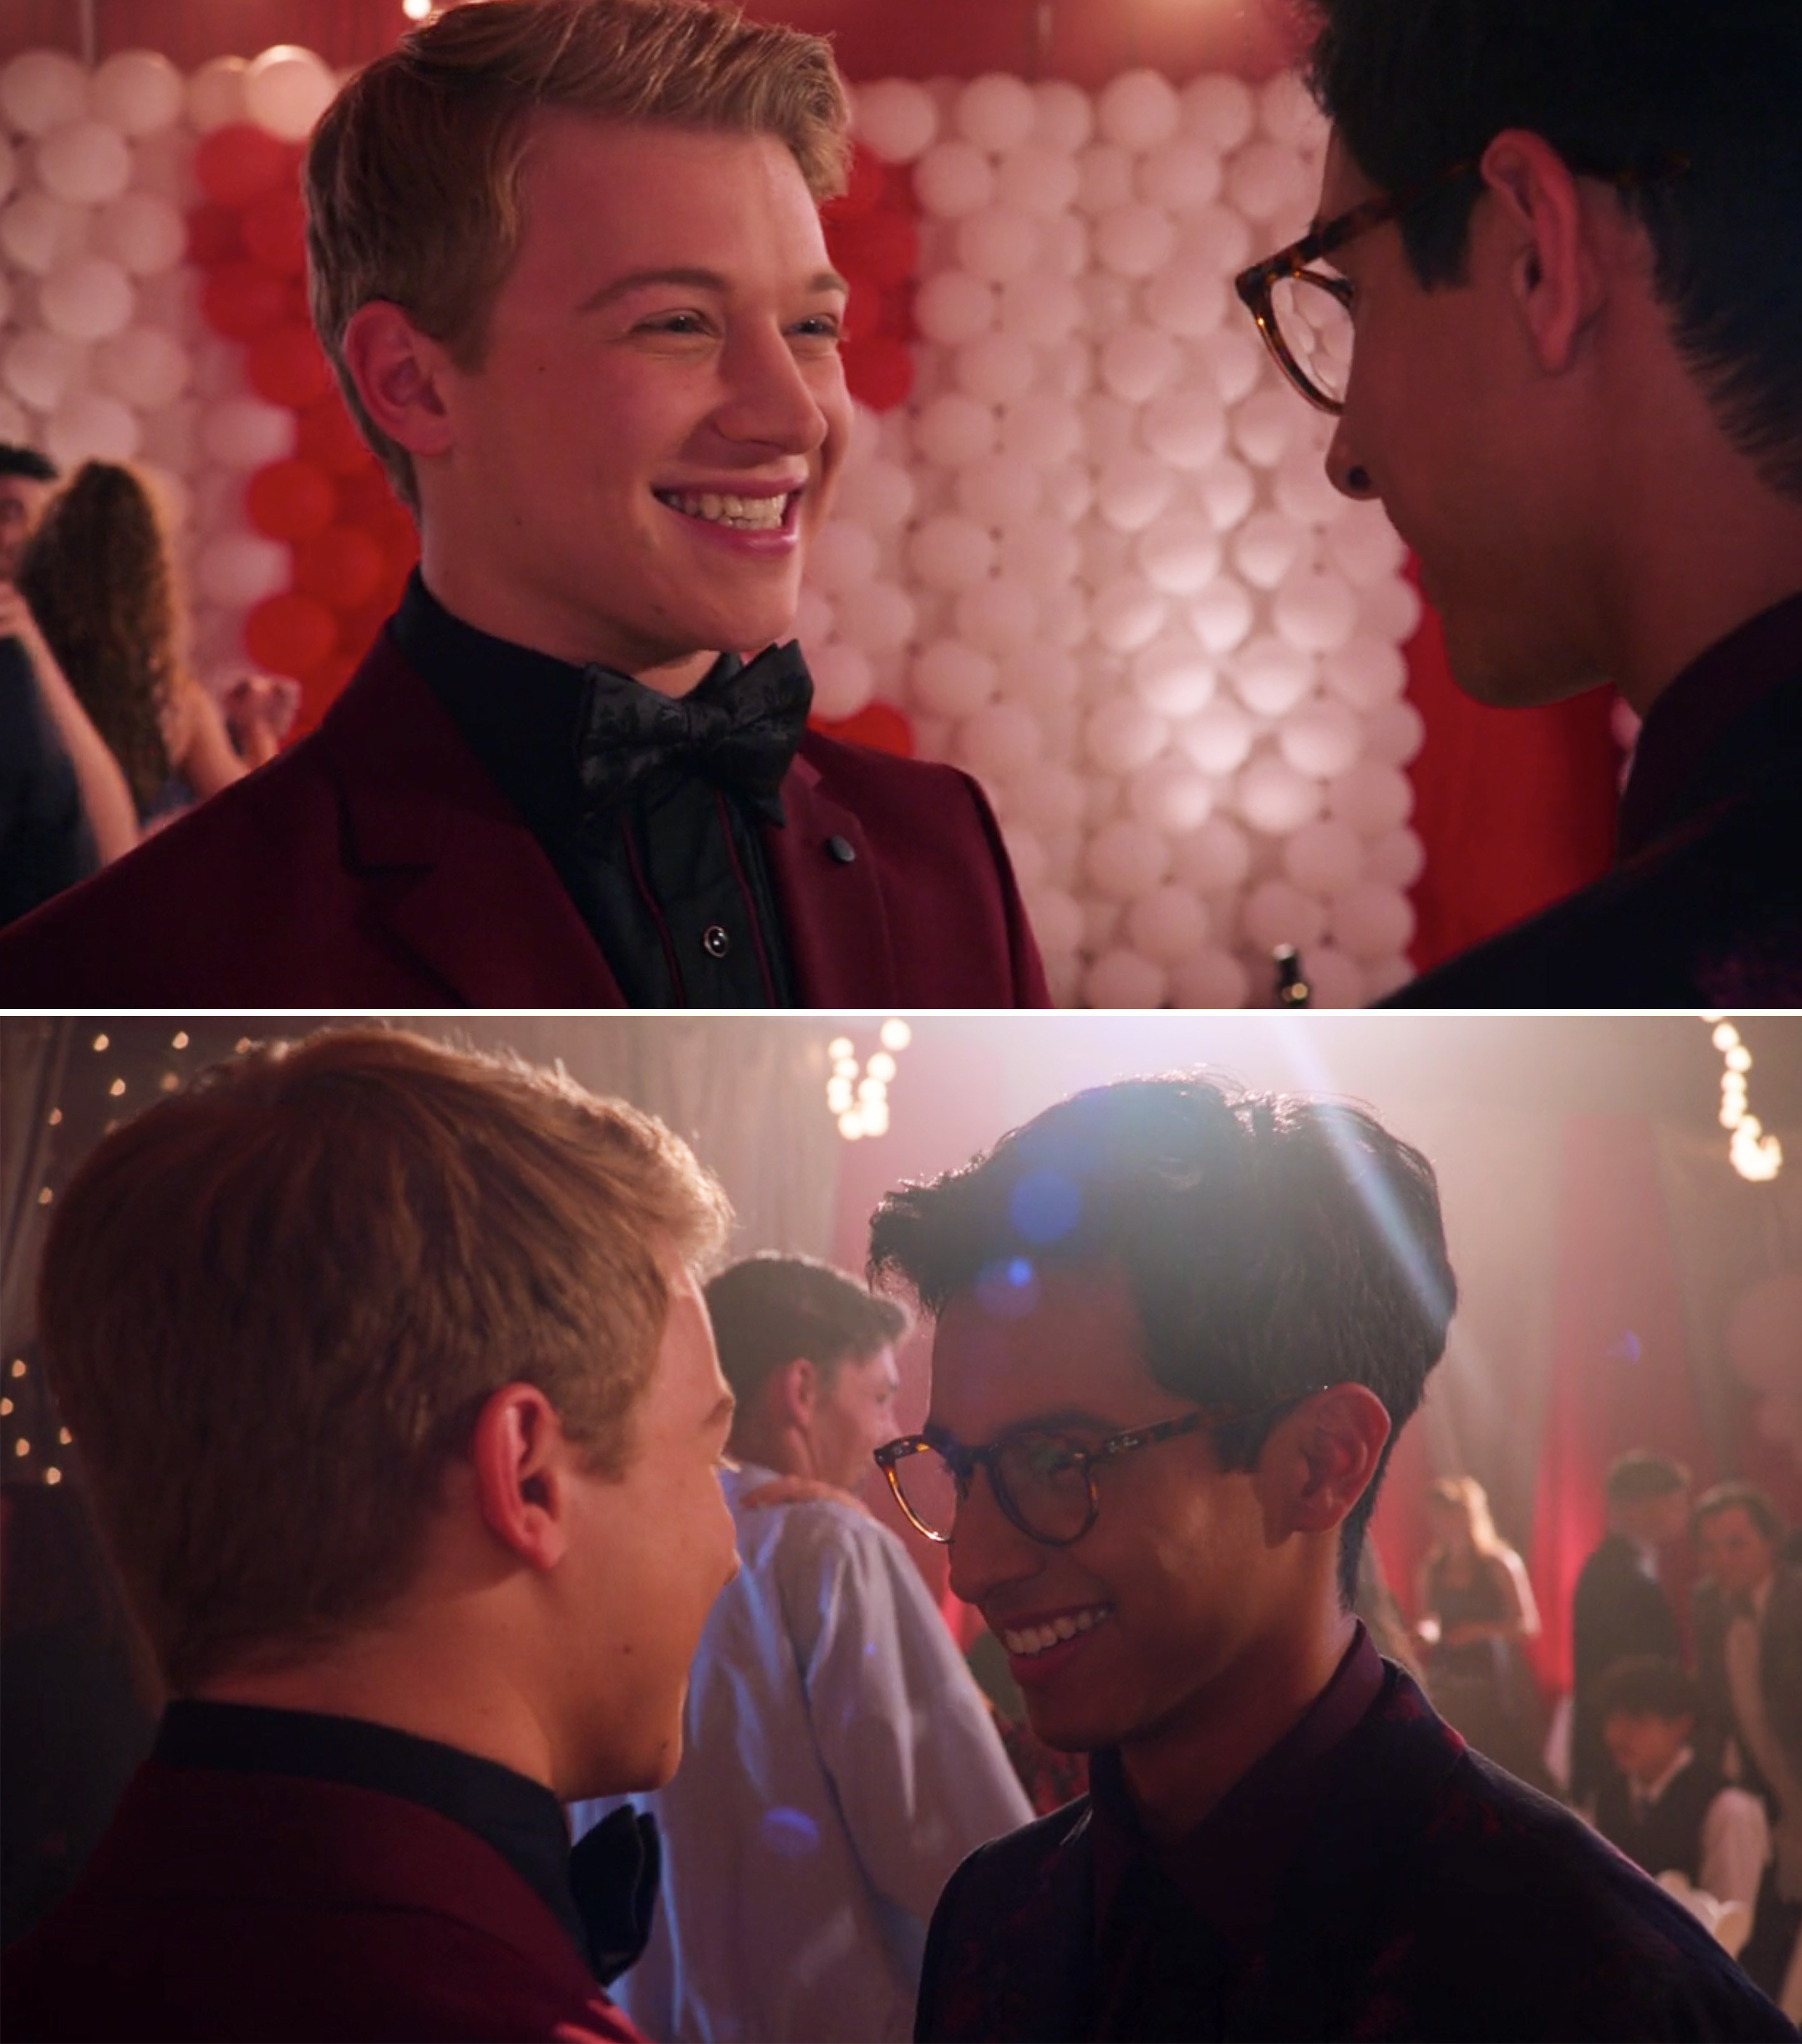 Seb and Carlos smiling at each other on the dance floor